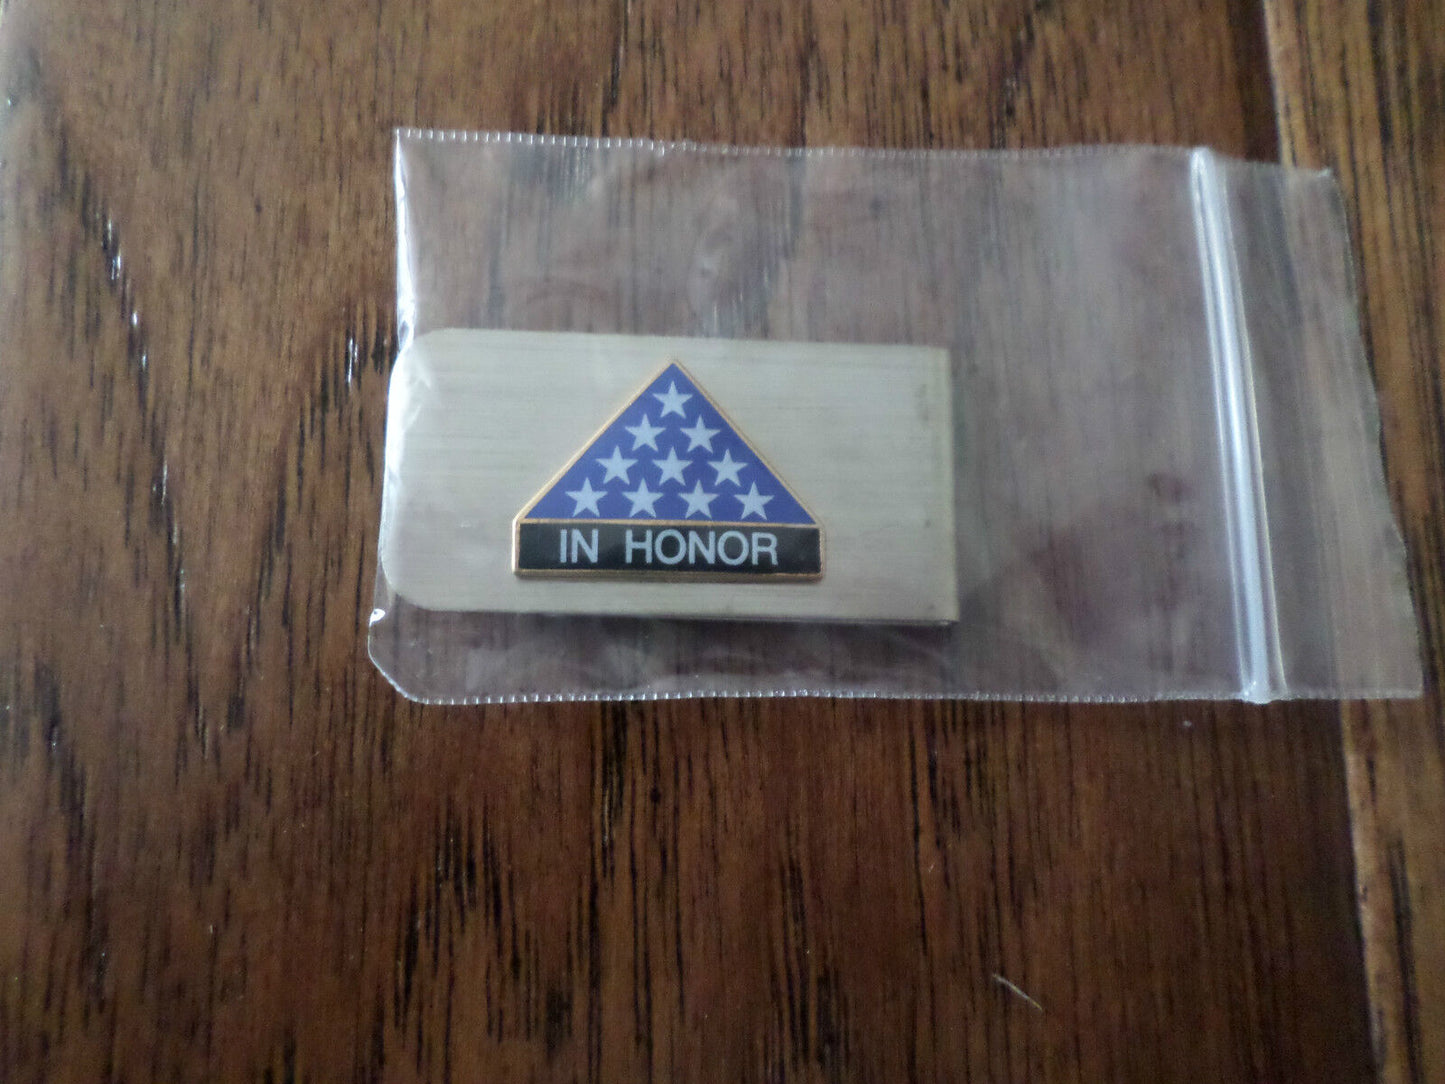 U.S MILITARY IN HONOR MONEY CLIP ARMY NAVY MARINE CORPS AIR FORCE POLICE